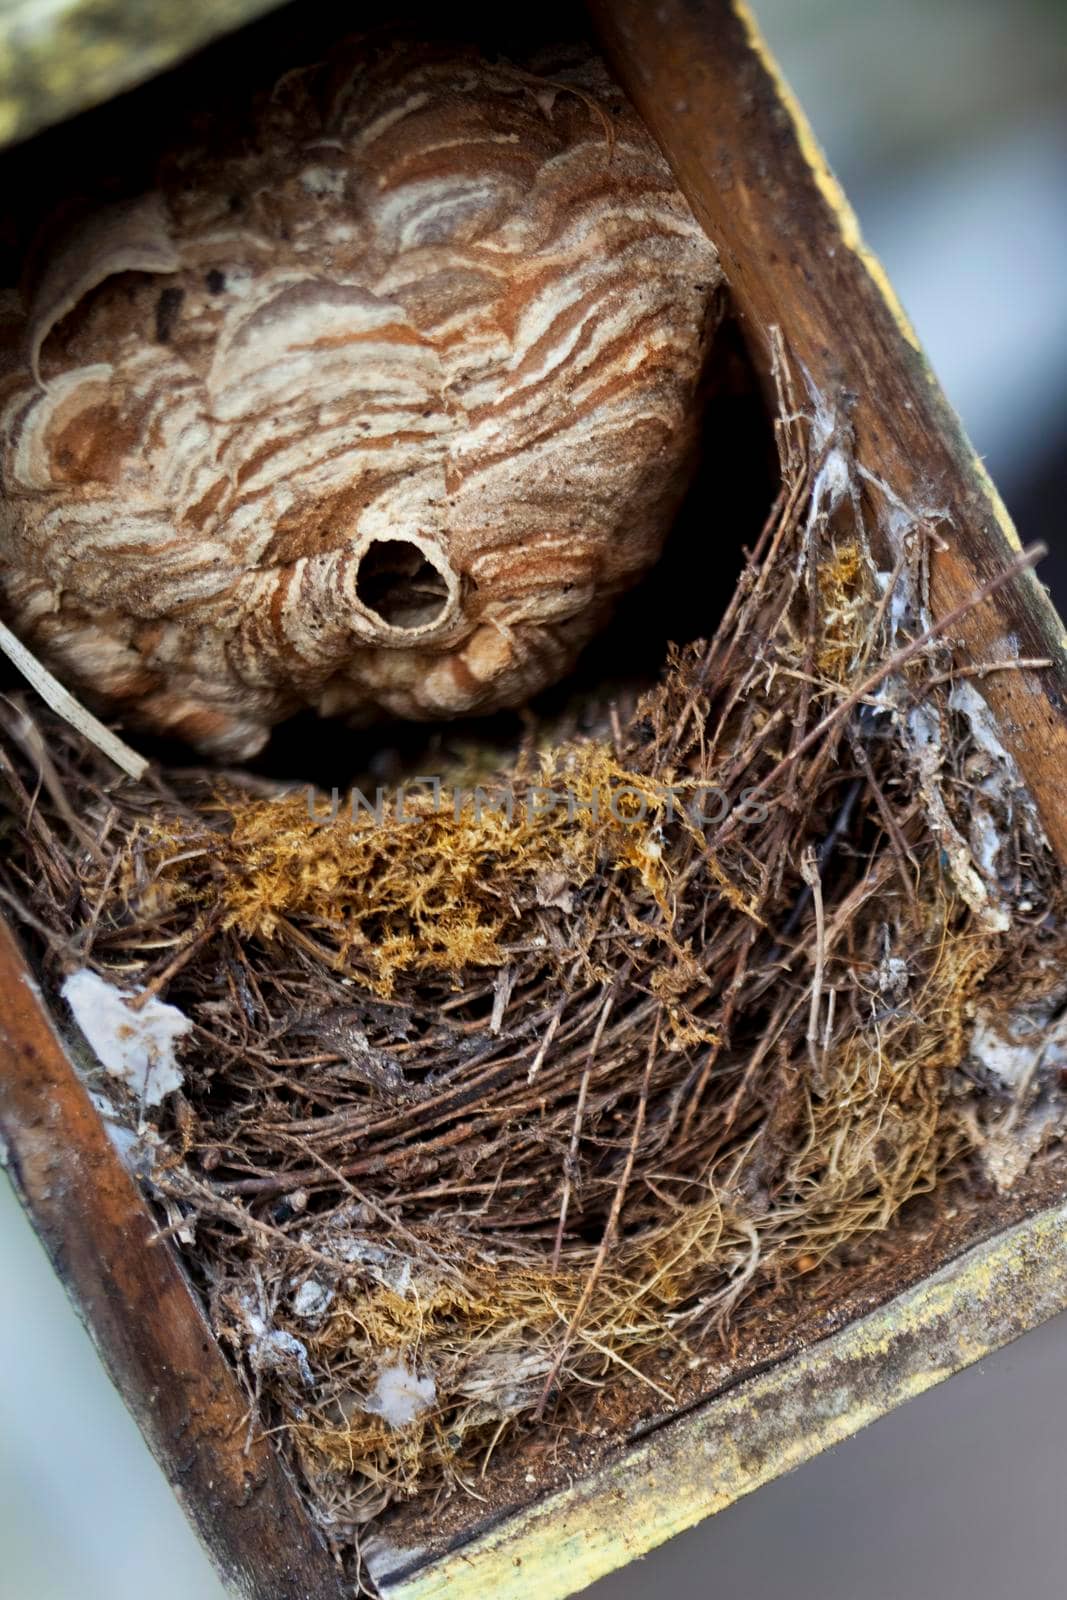 Dried grass and hornet's nest in a small wooden hut